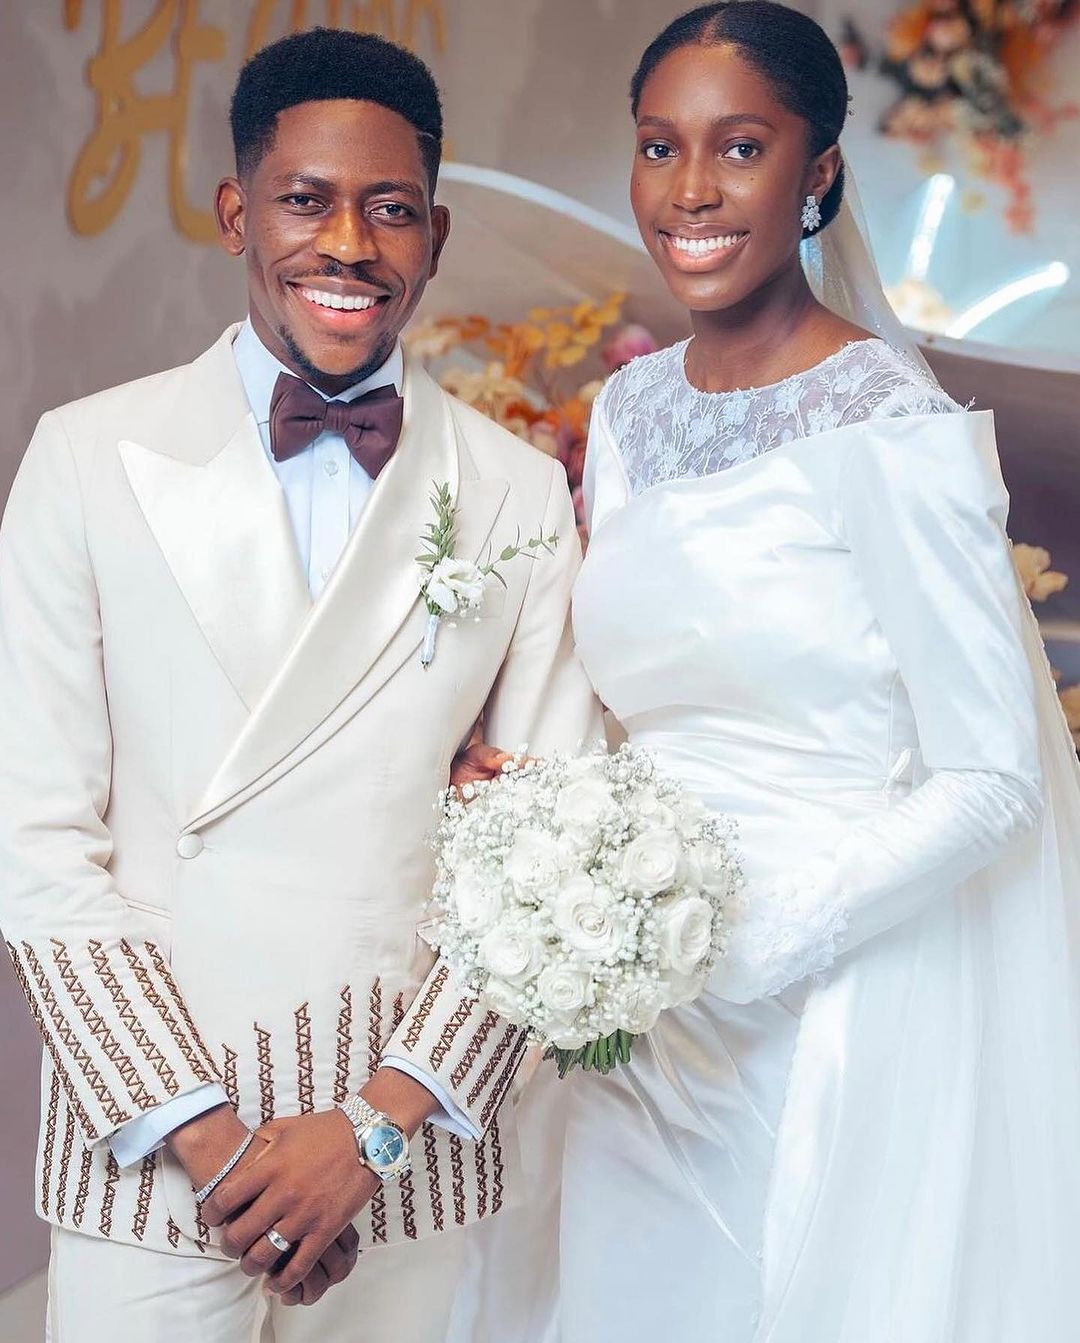 "This guarantees nothing; success of marriage is exclusively on man and wife" – Influencer, Morris reacts to Moses Bliss and wife being prayed for 